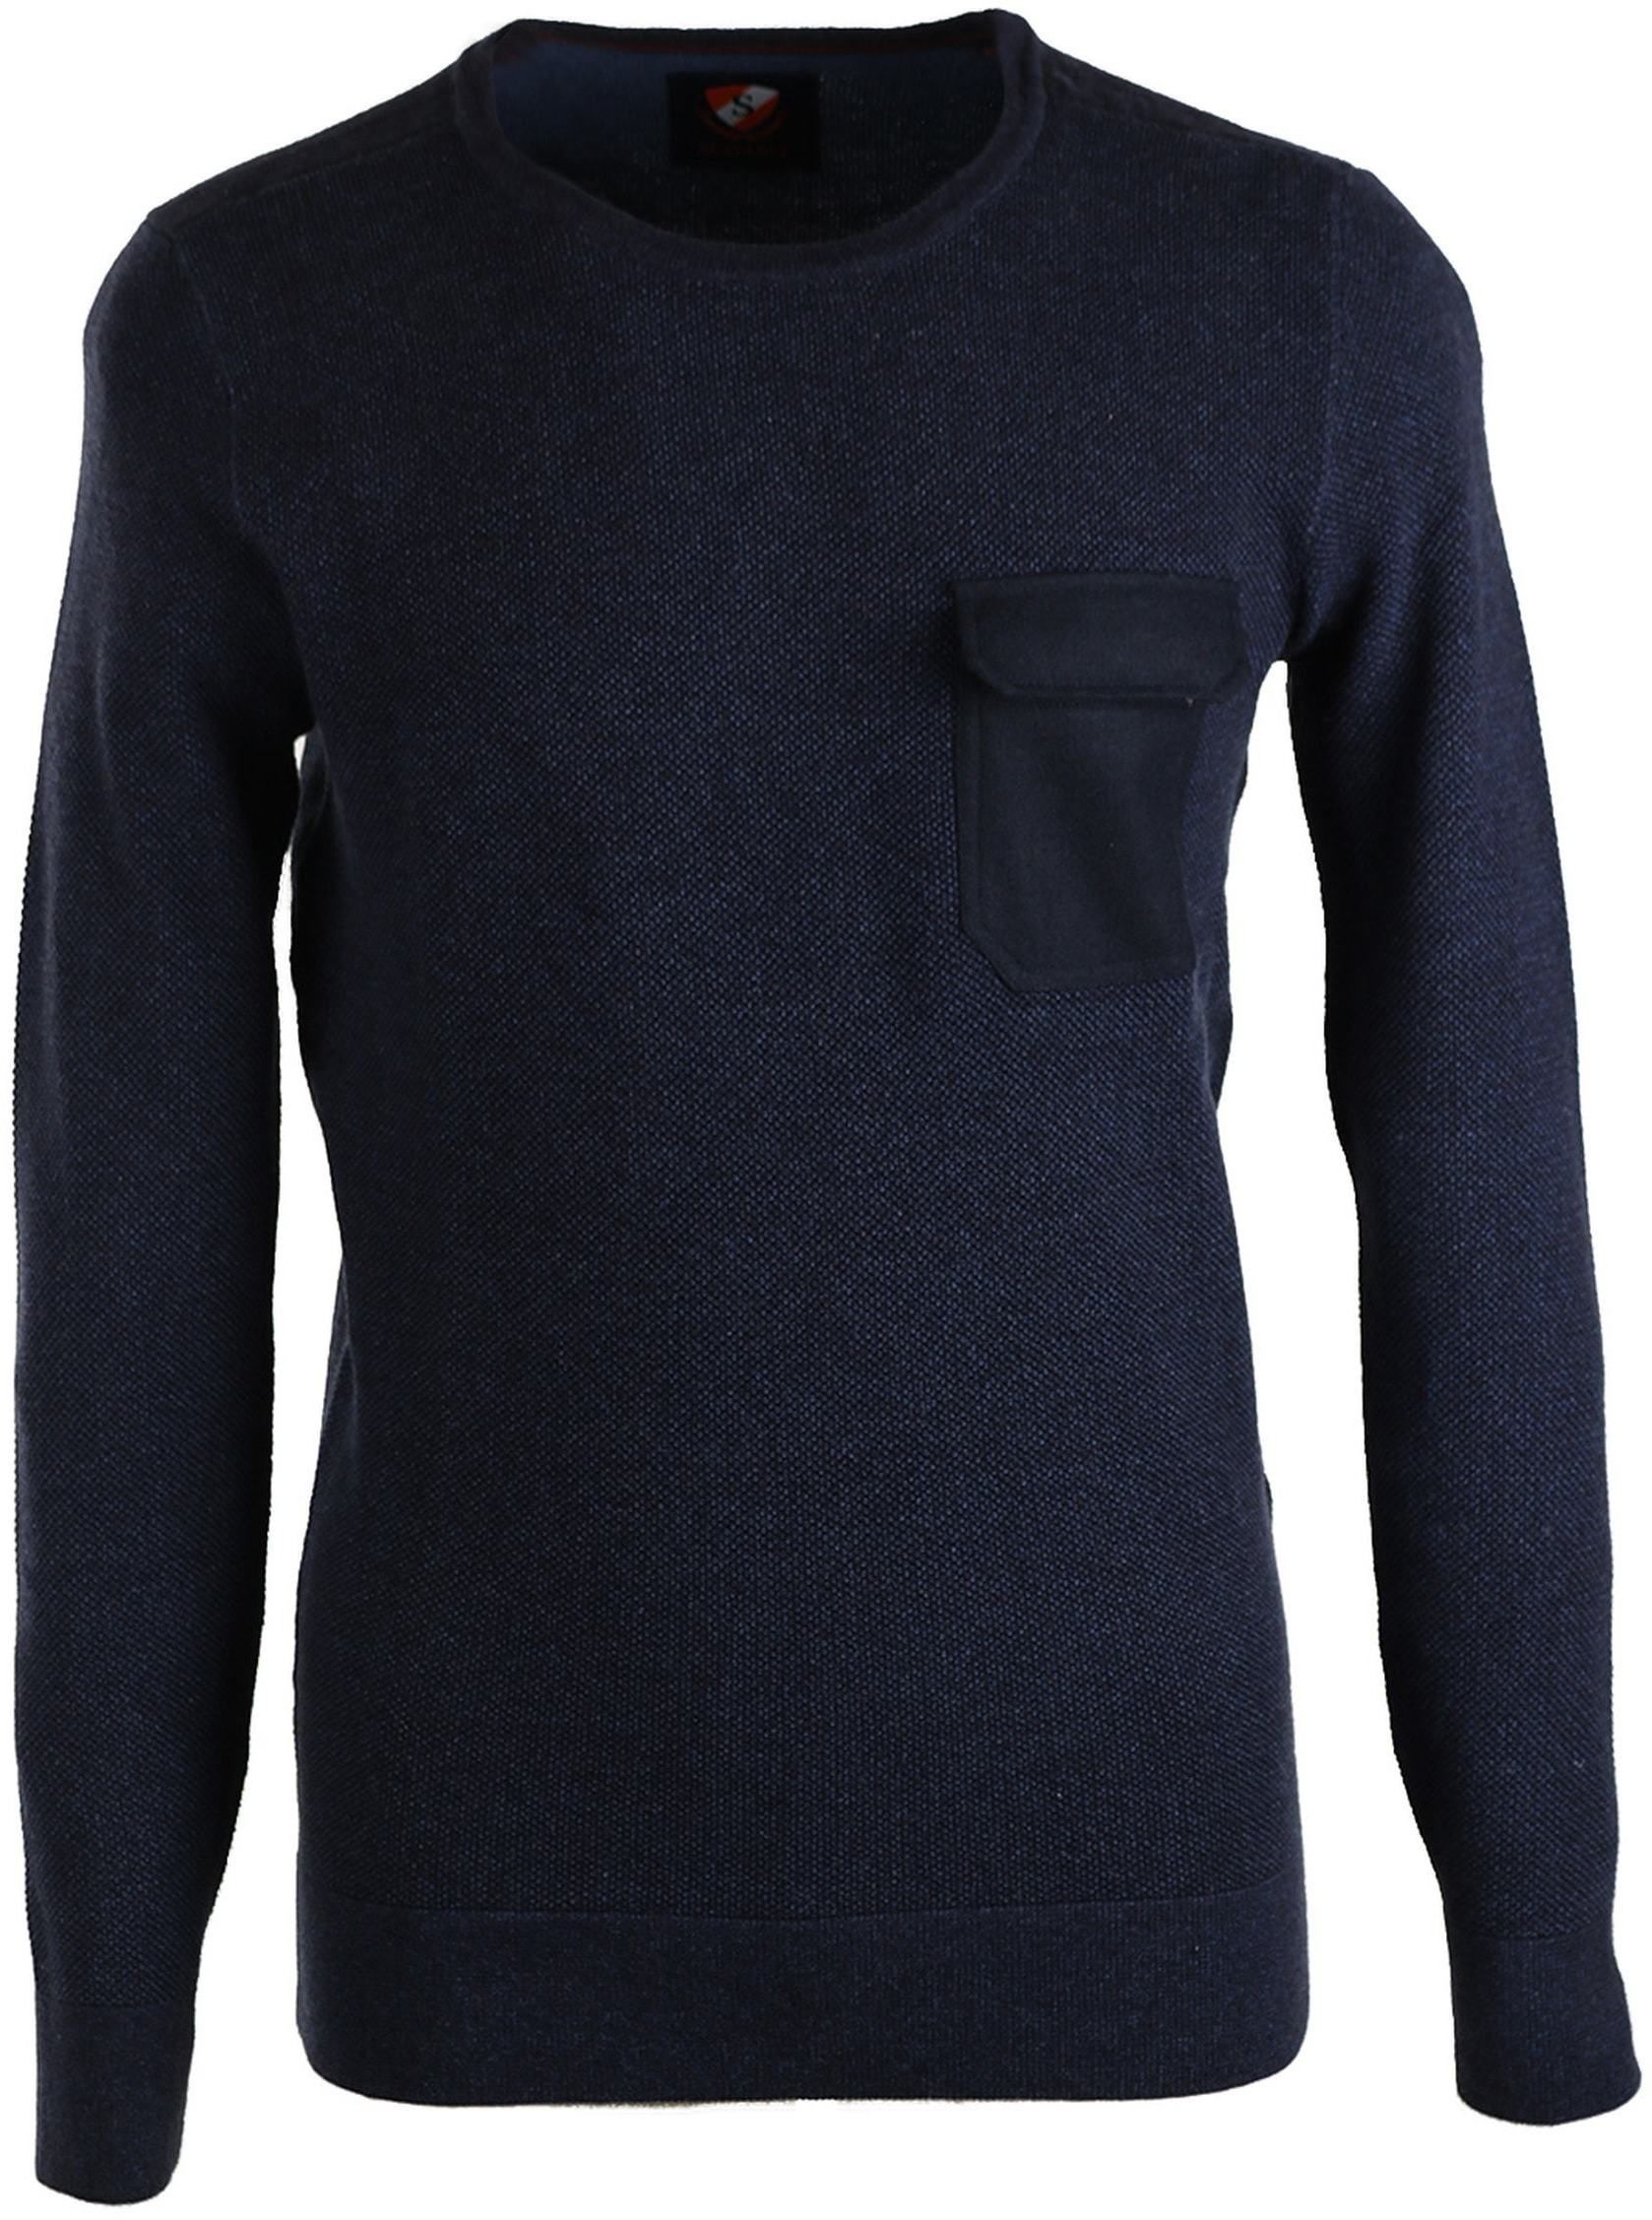 Suitable Pullover Ruud O-Neck Navy Dark Blue size M